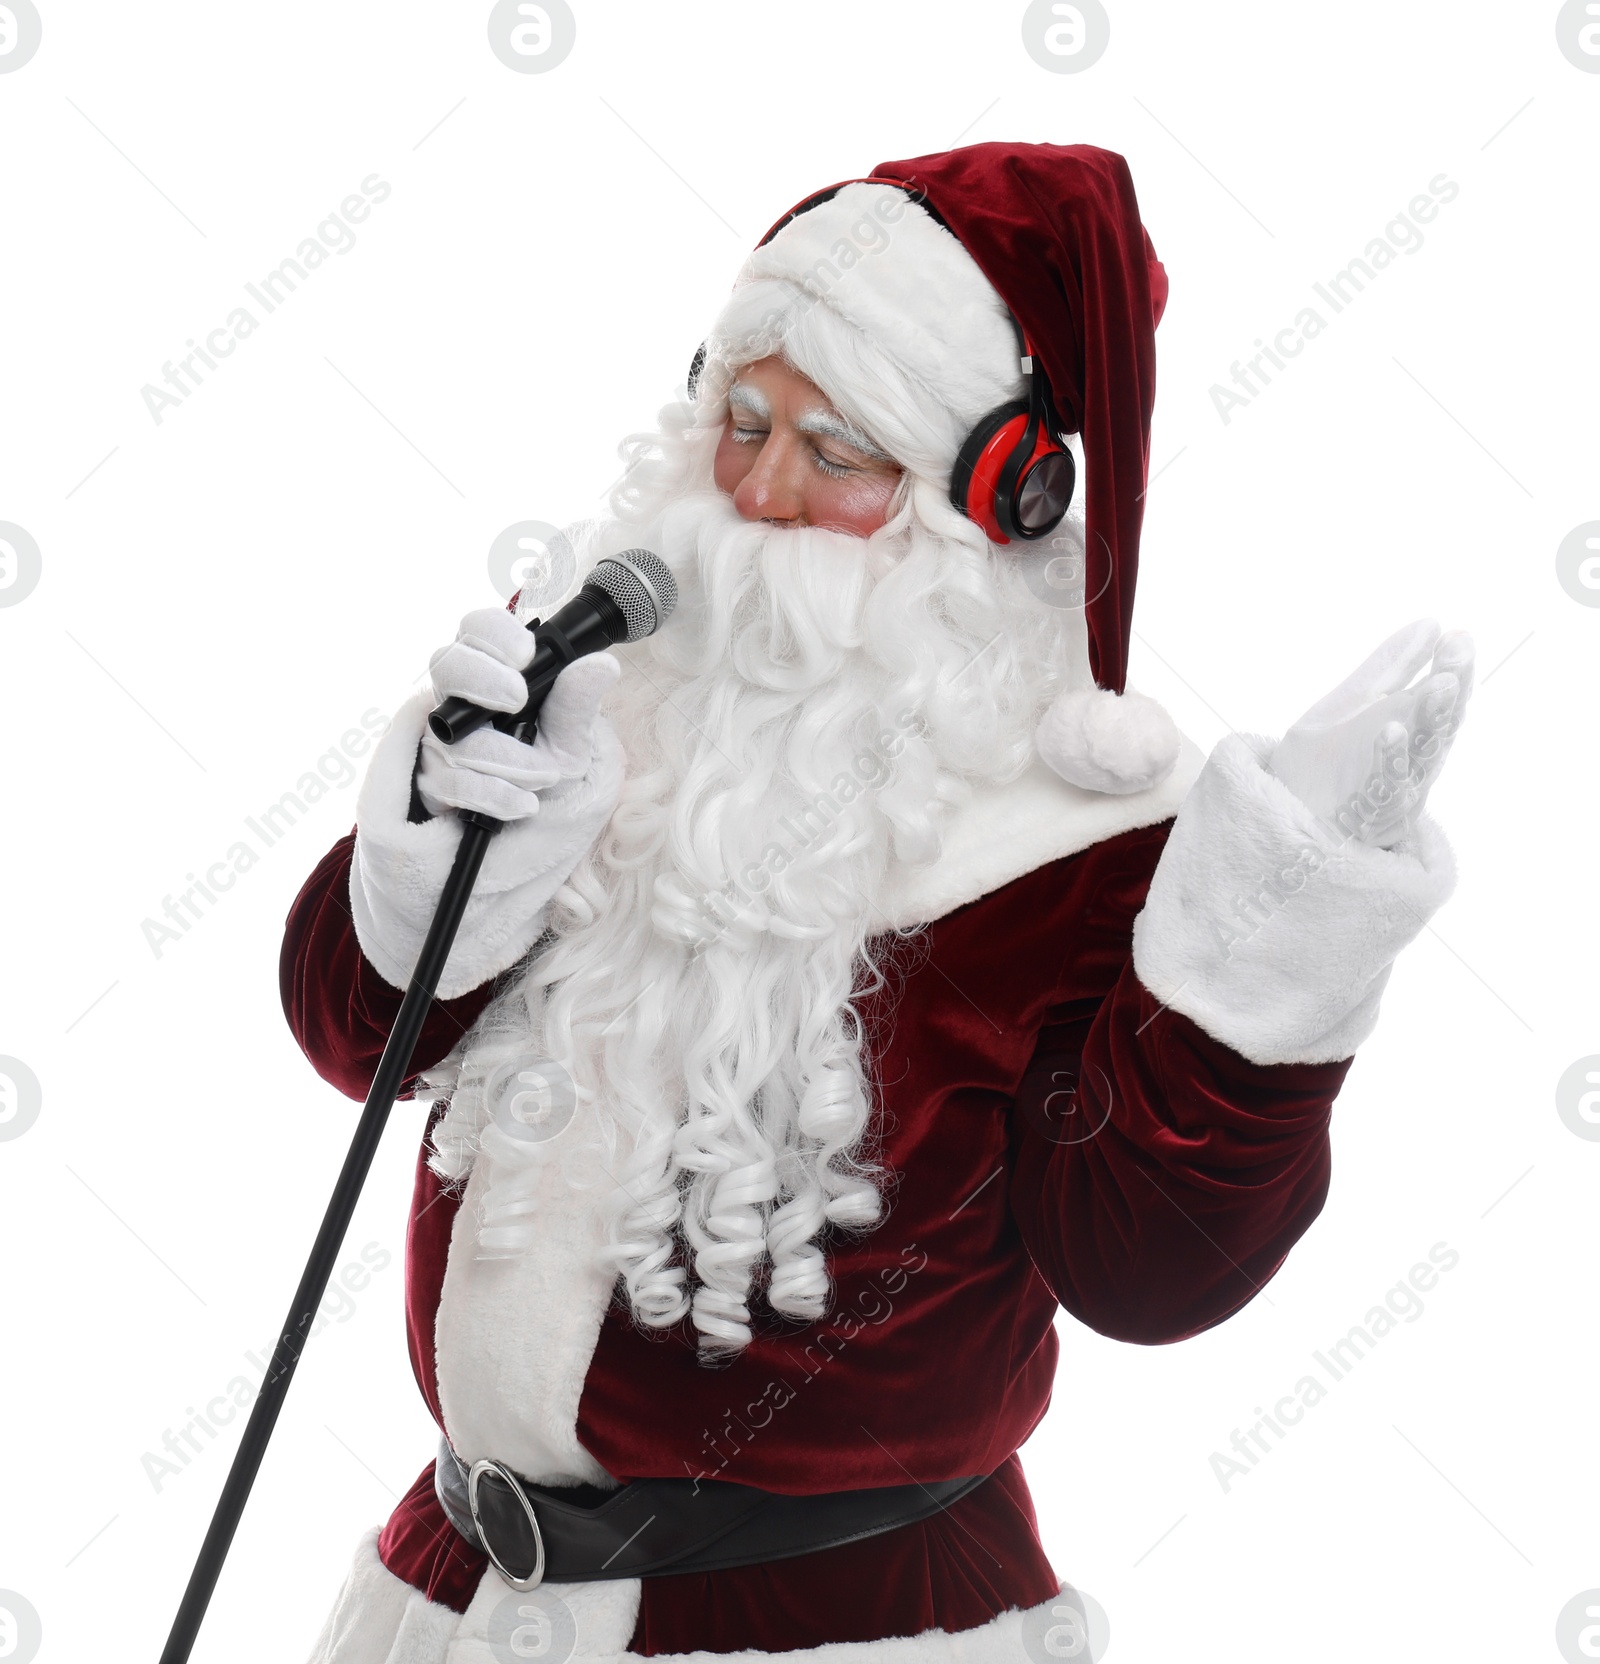 Photo of Santa Claus with headphones and microphone on white background. Christmas music